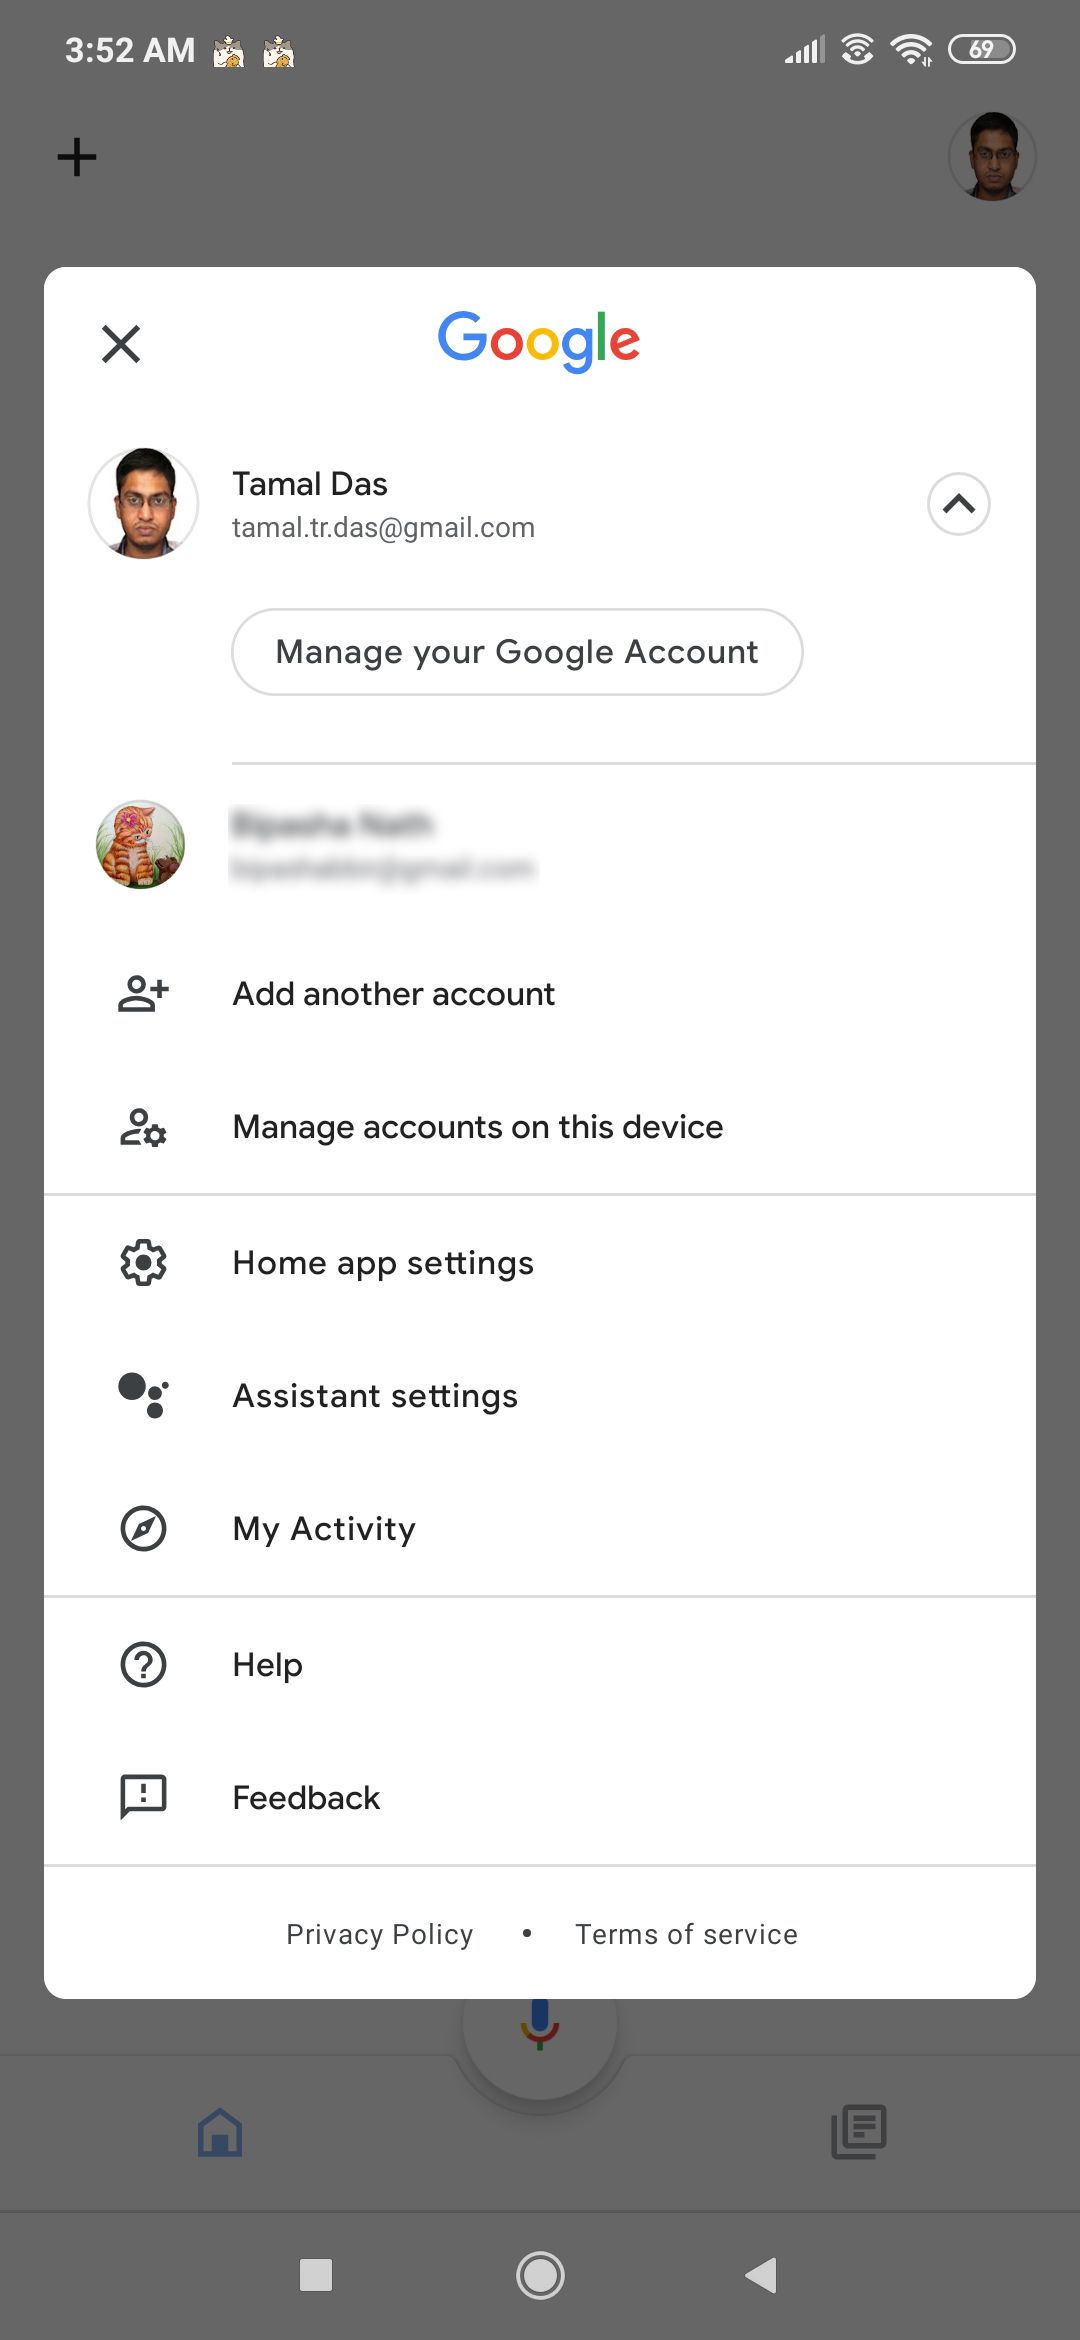 An image showing multiple accounts in Google Home app